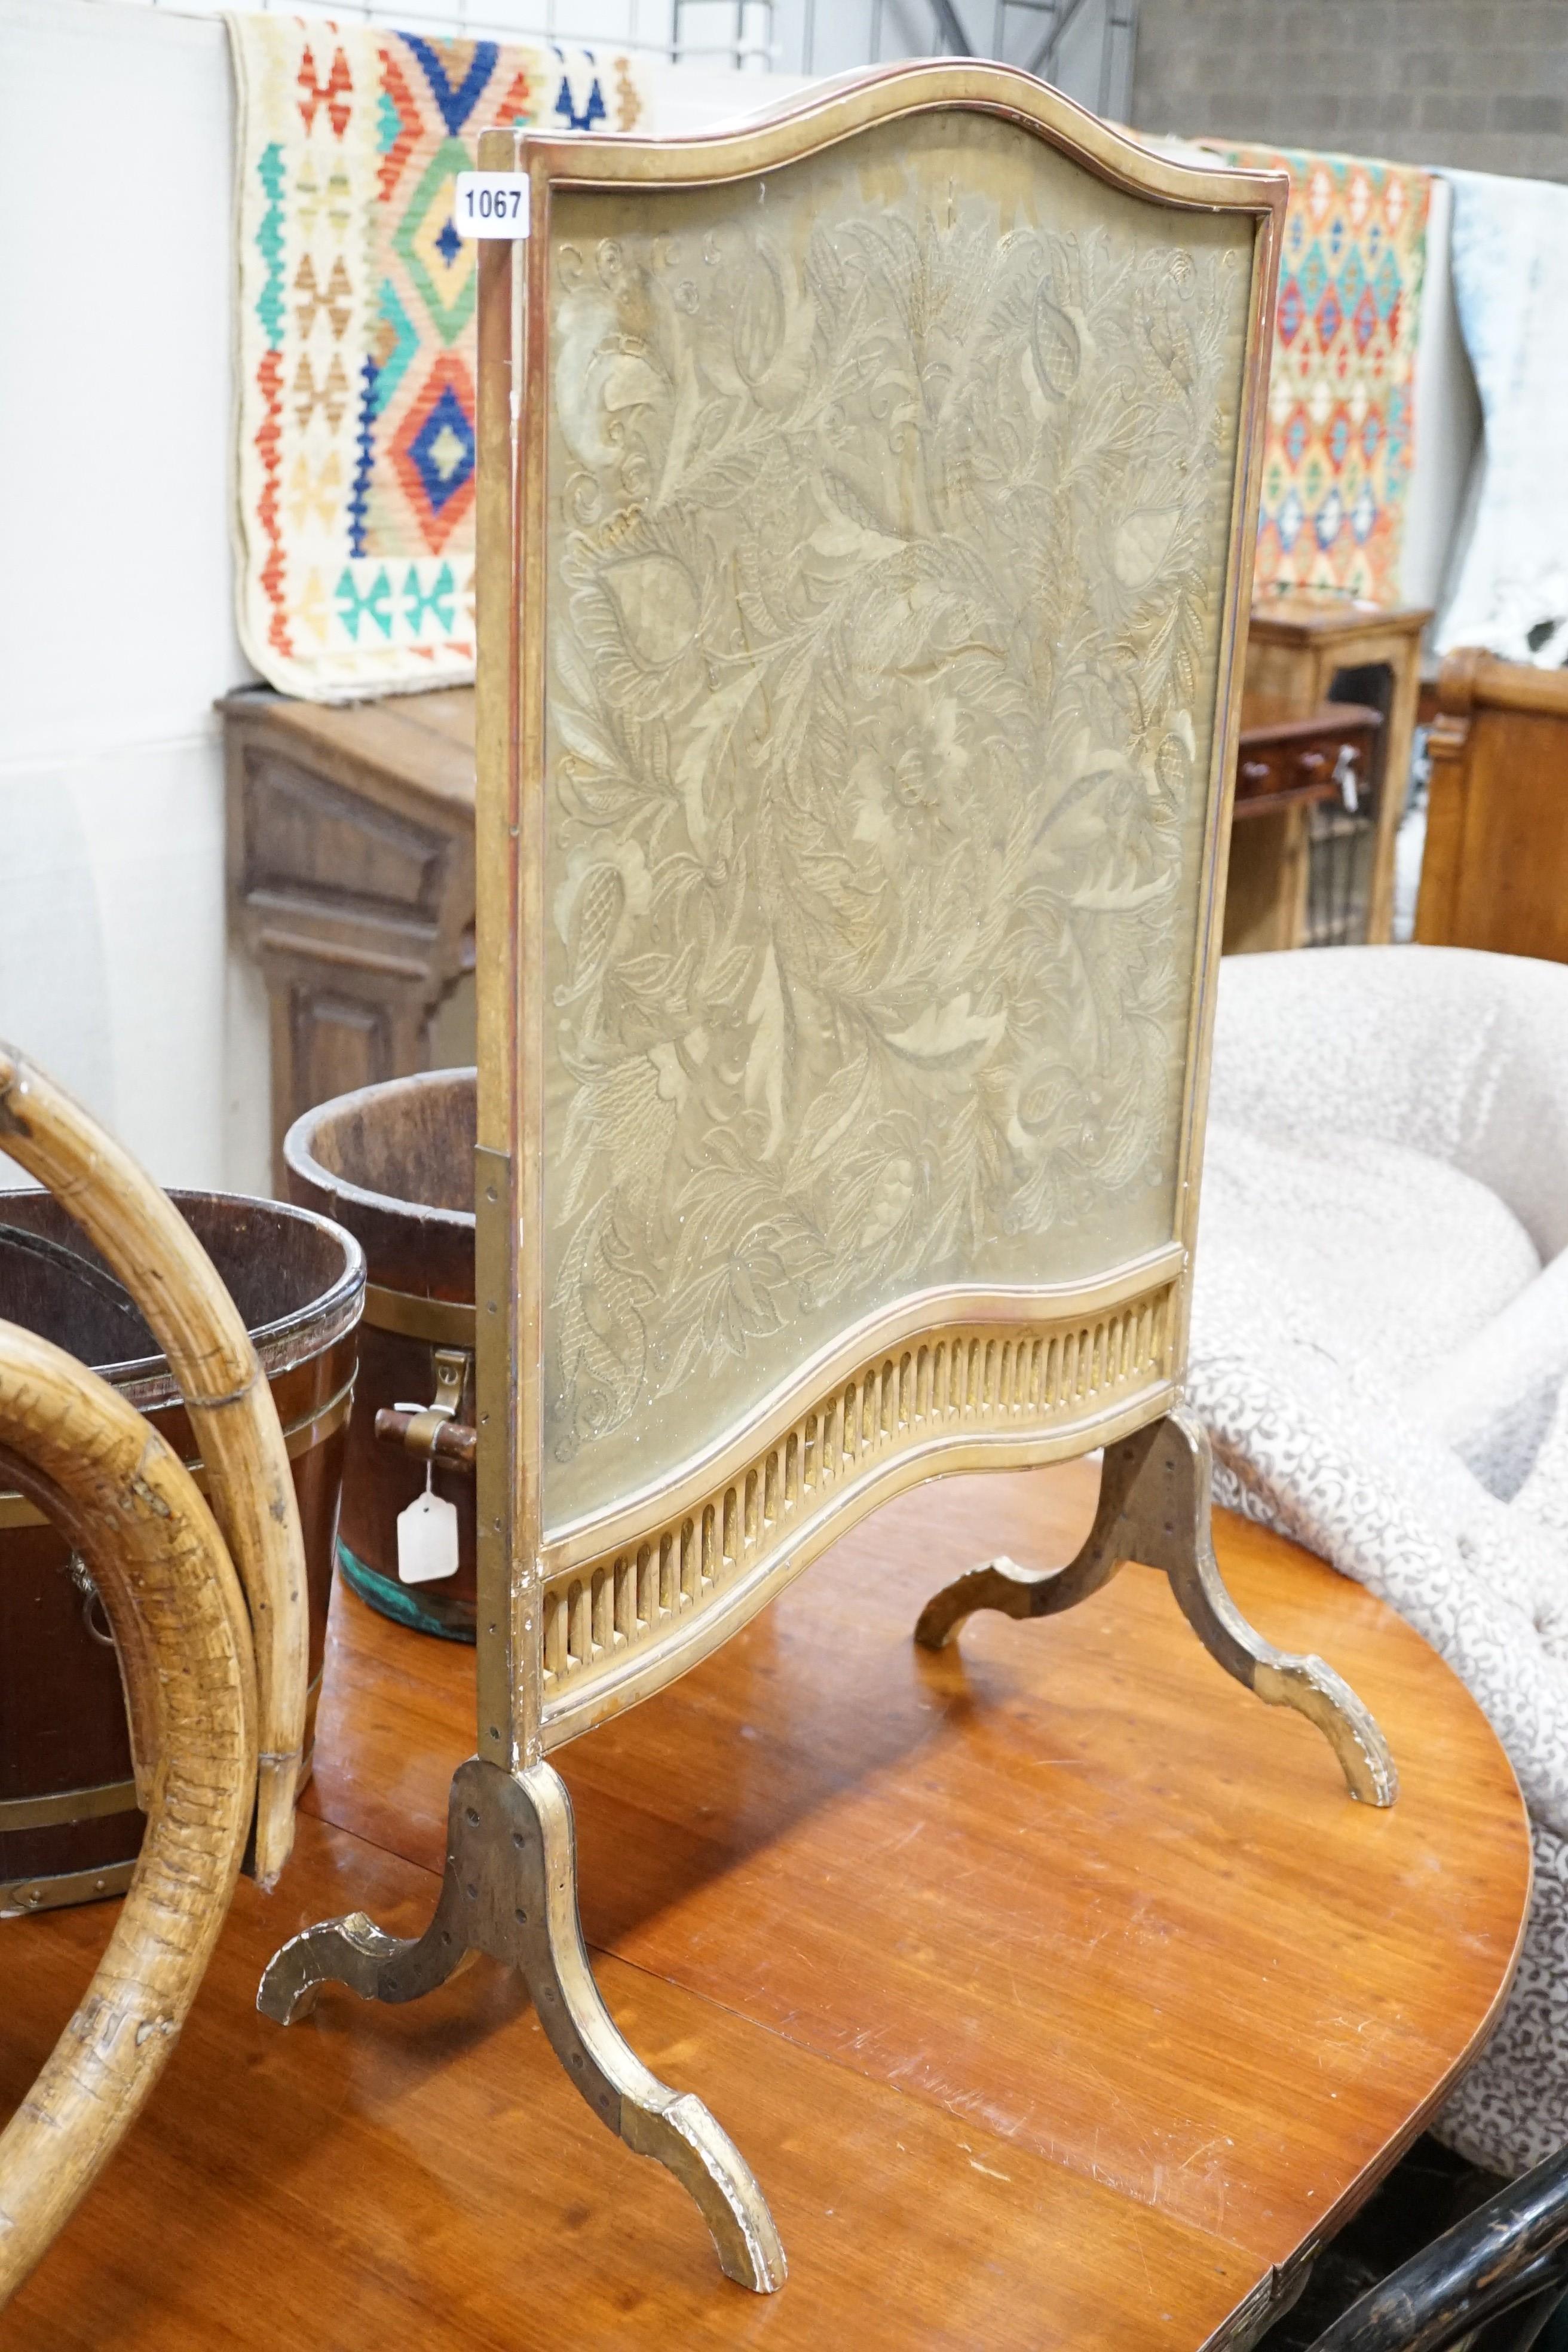 A carved gilt wood fire screen with internal needlework panel, width 56cm, height 92cm